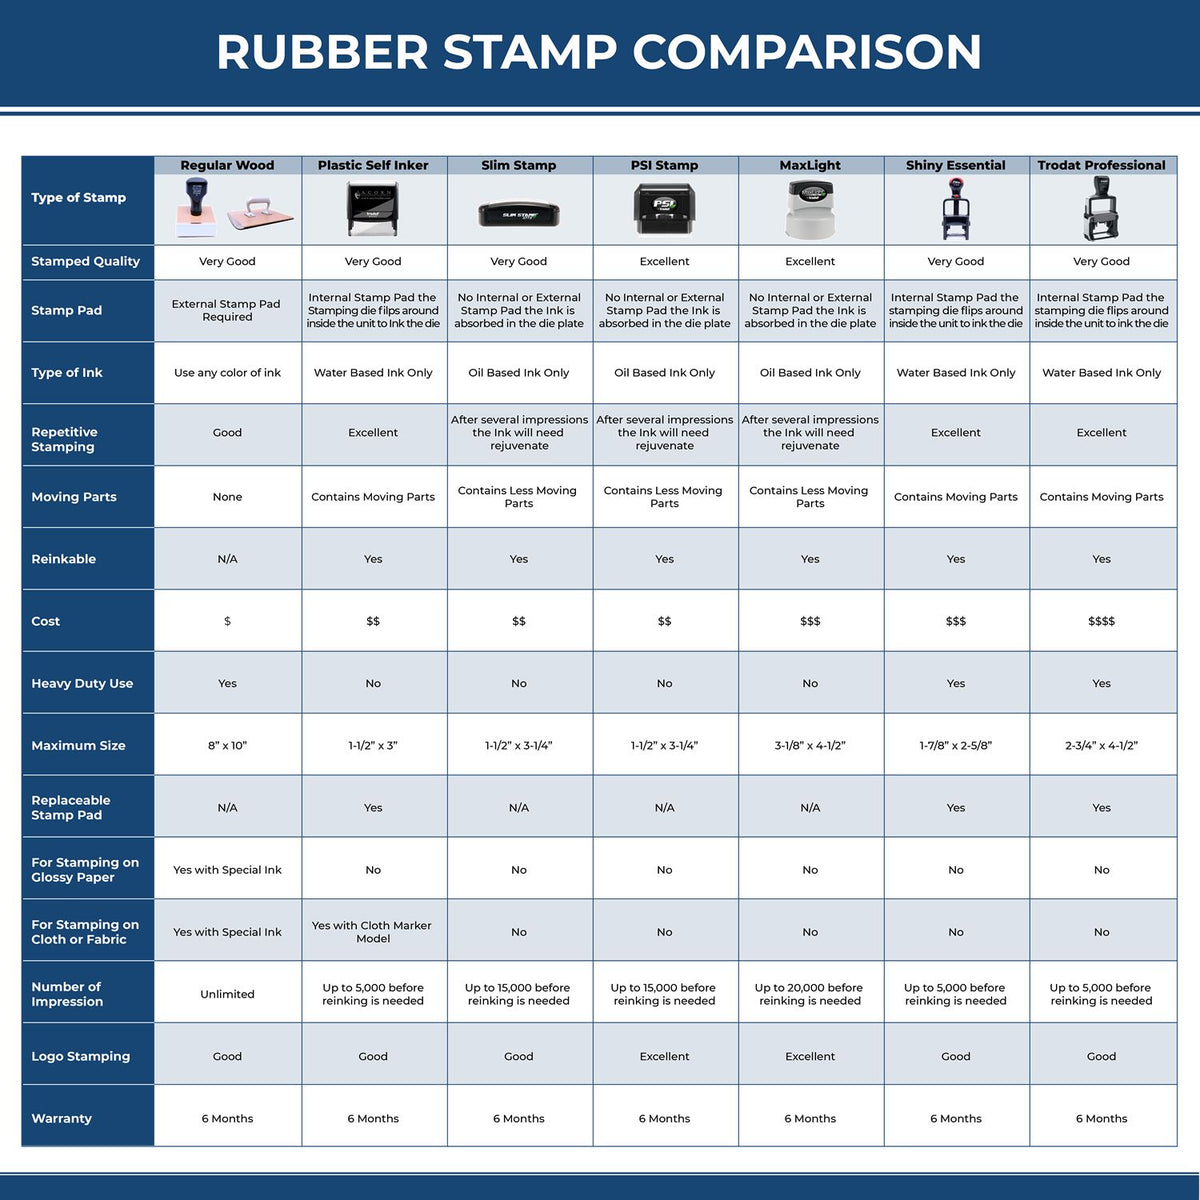 A comparison chart for the different types of mount models available for the PSI Pennsylvania Notary Stamp.